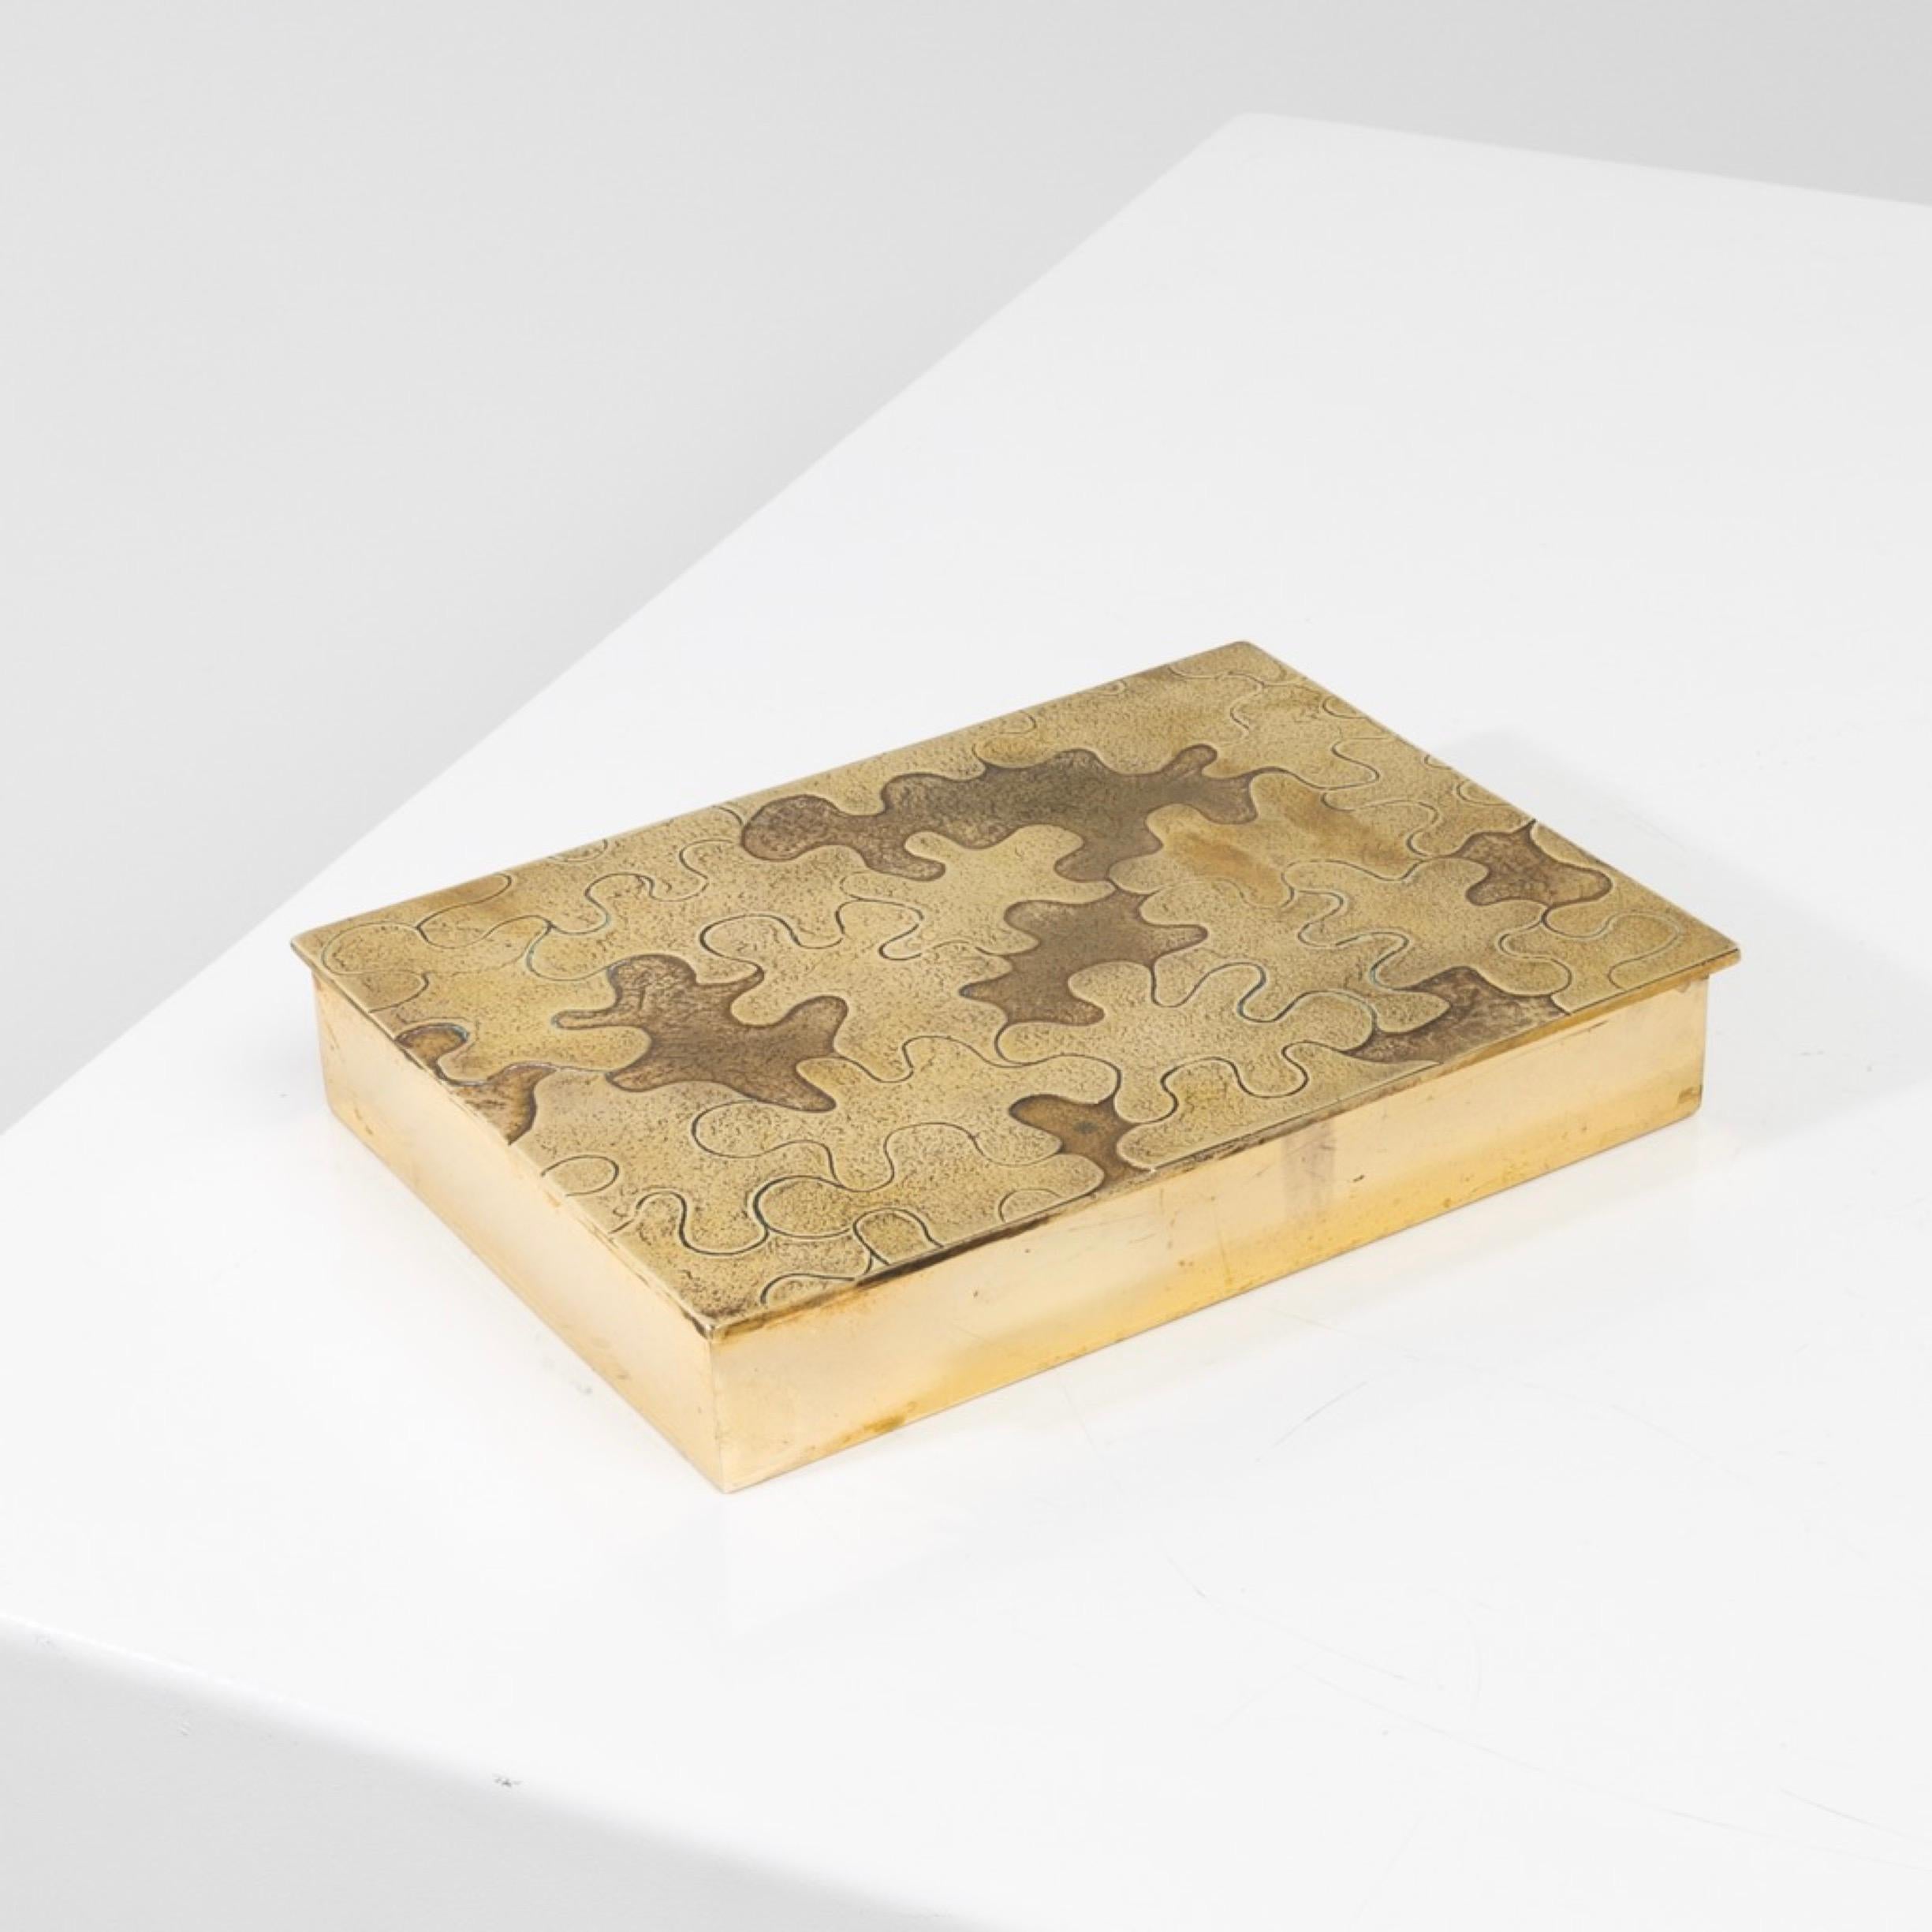 Puzzle by Line Vautrin – Box in gilded bronze
Large and wide box in gilded bronze whose lid is carved with a puzzle by Line Vautrin.
The chiselled puzzle pieces with different decorations in high and low relief.
A very rare model by Line Vautrin.